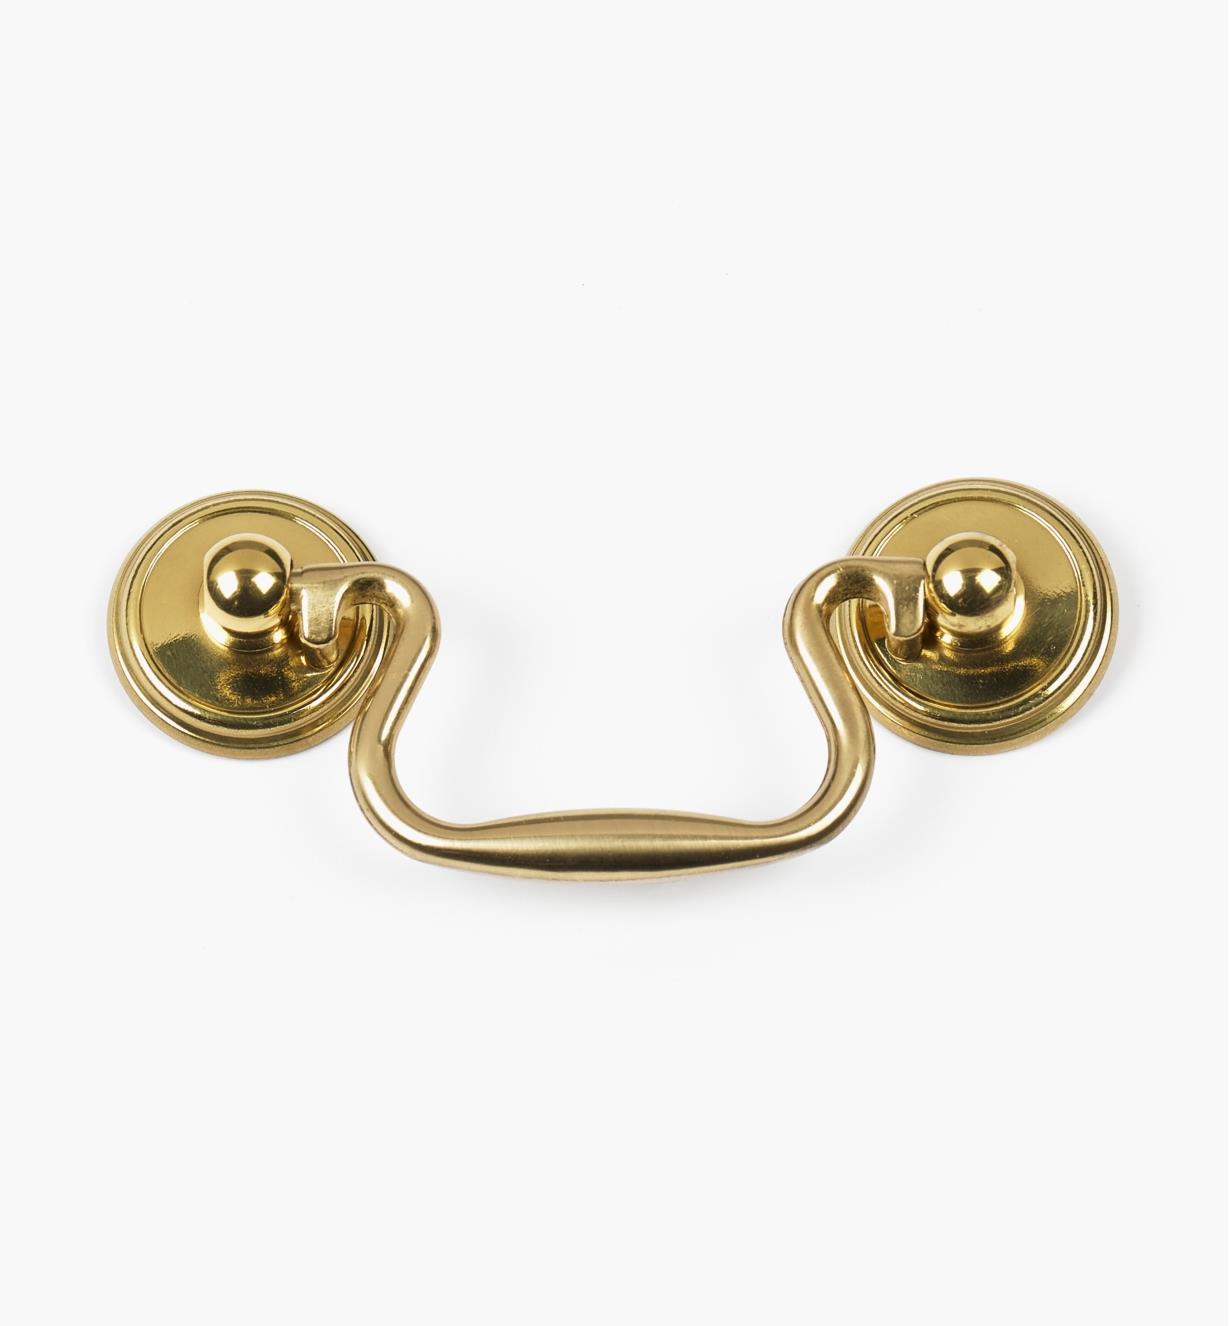 01A8510 - 2 1/2" Polished Brass Pull